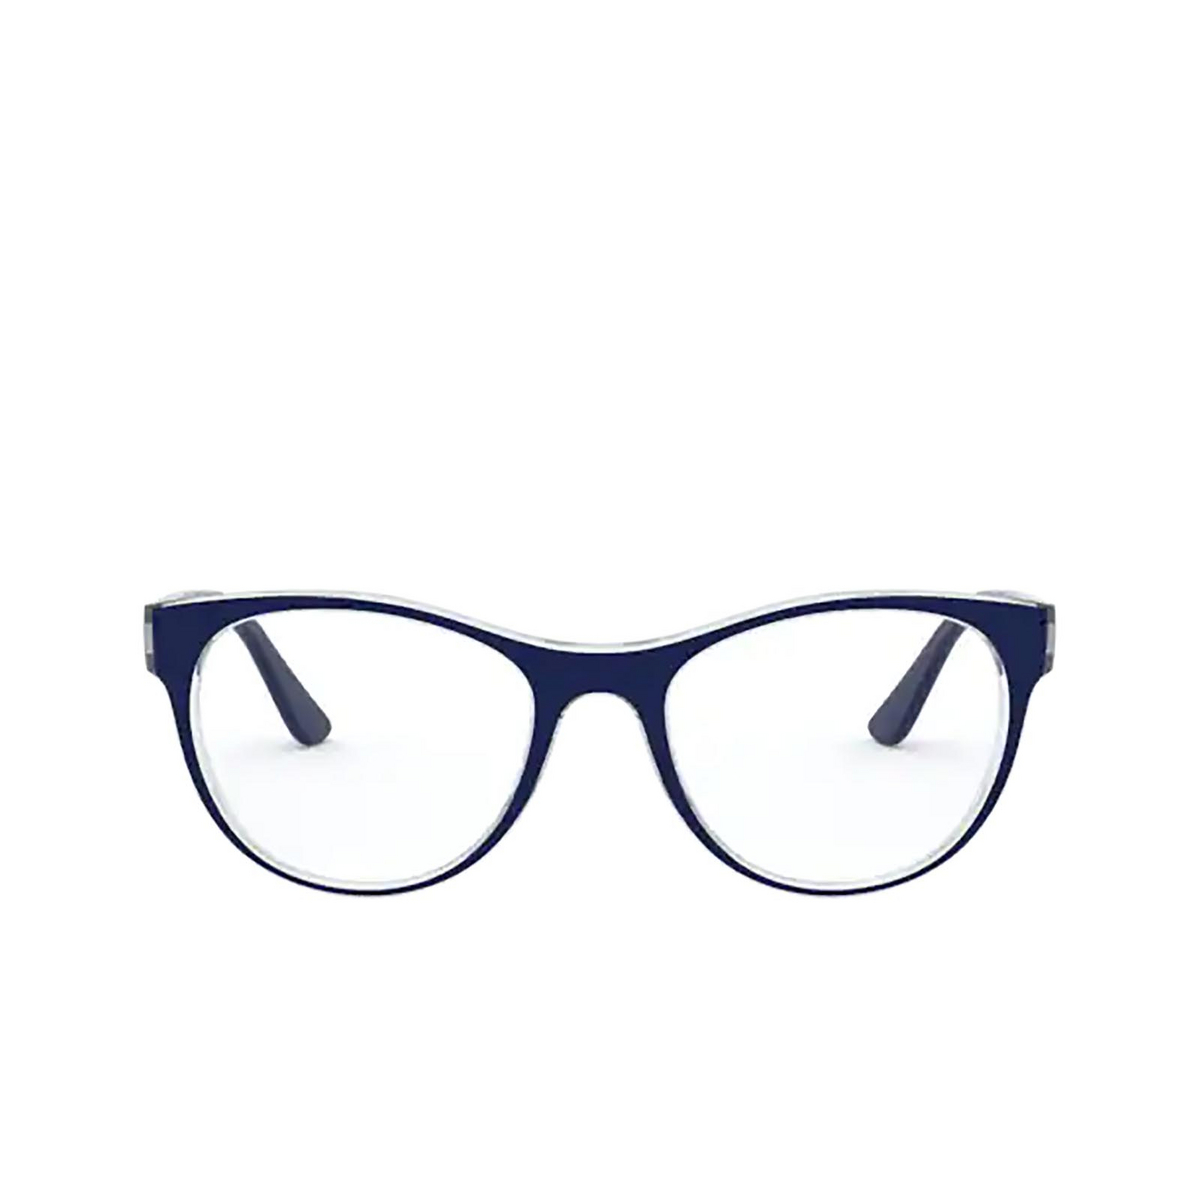 Vogue® Cat-eye Eyeglasses: VO5336 color 2841 Top Blue / Serigraphy - front view